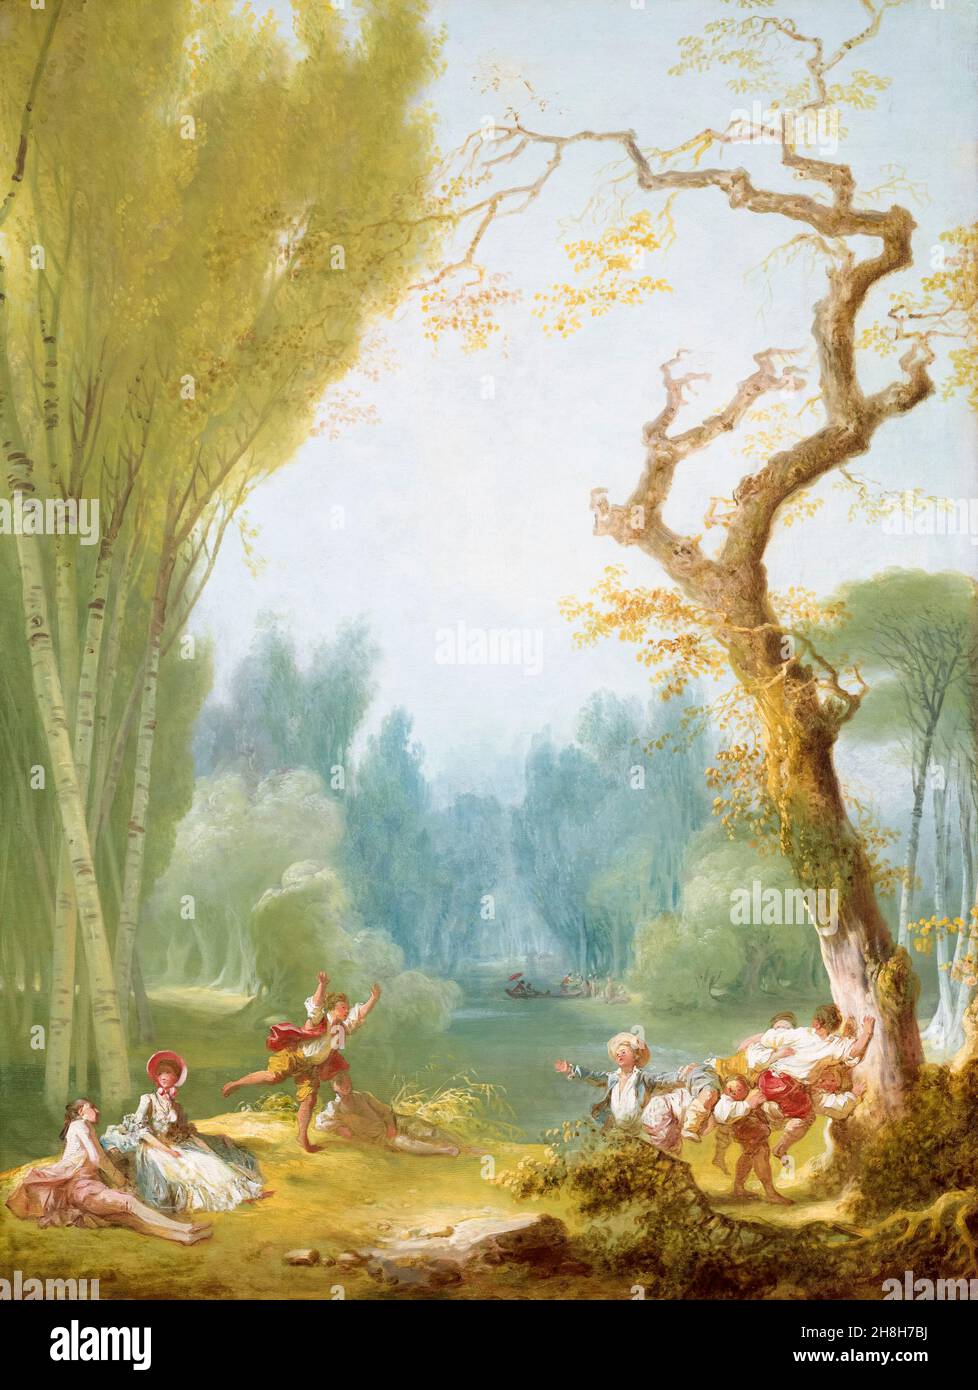 Jean Honoré Fragonard, A Game of Horse and Rider, painting, 1775-1780 Stock Photo